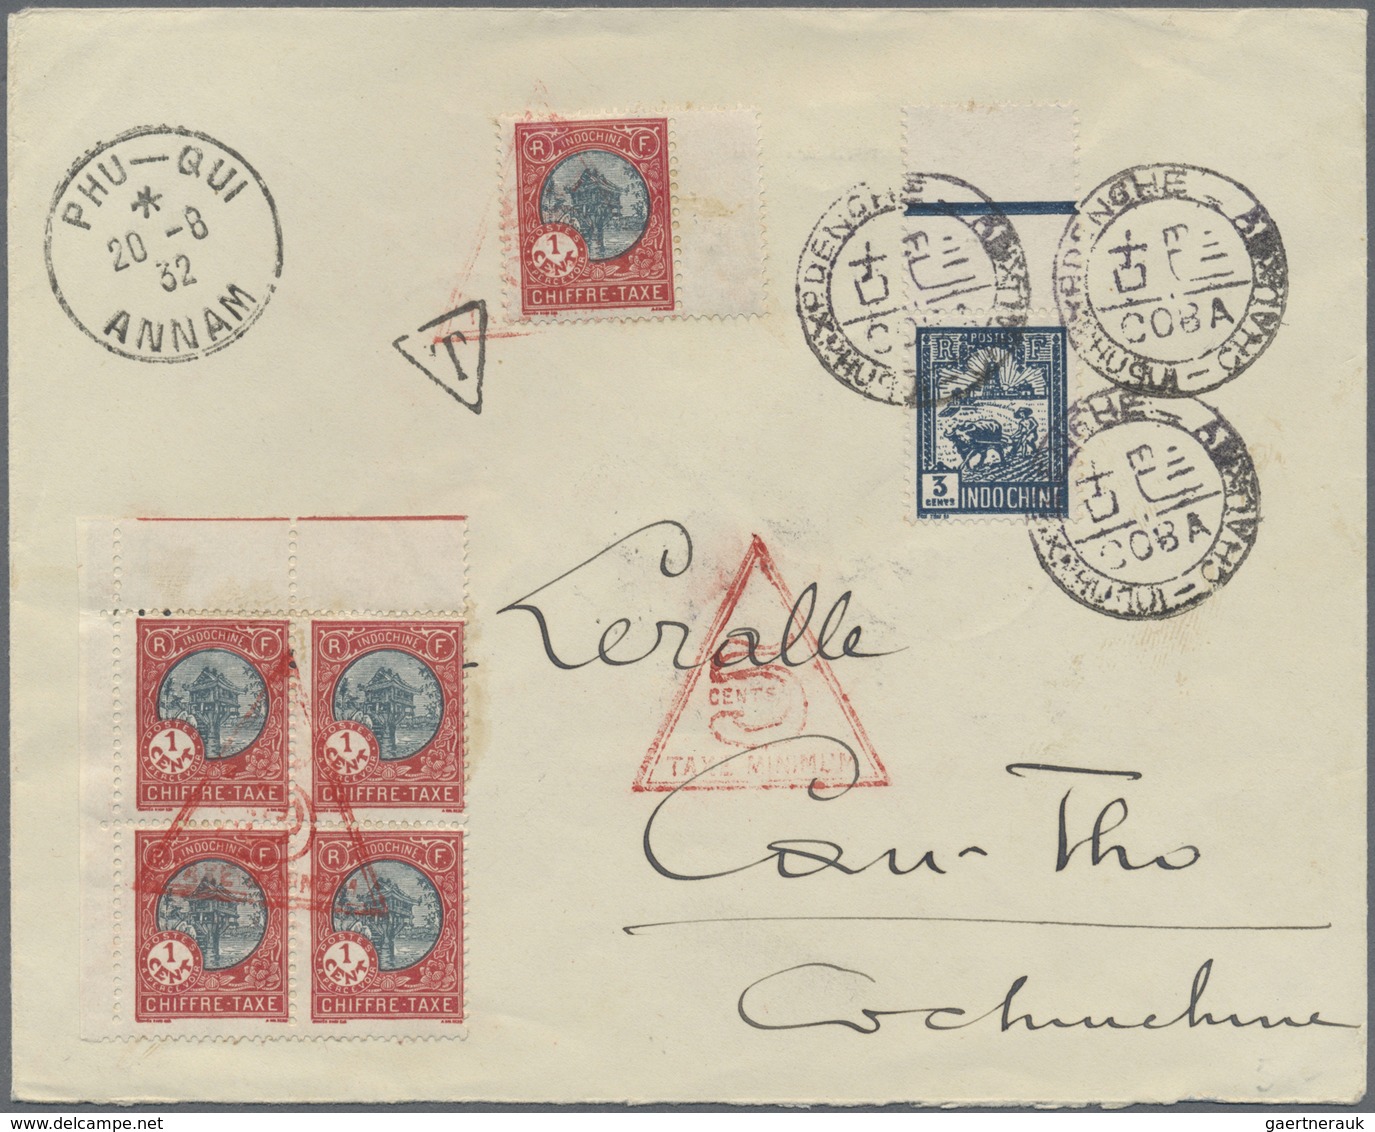 Br Französisch-Indochina - Portomarken: 1932. Envelope Addressed To Can-Tho Bearing Lndo-China SG 142, - Timbres-taxe